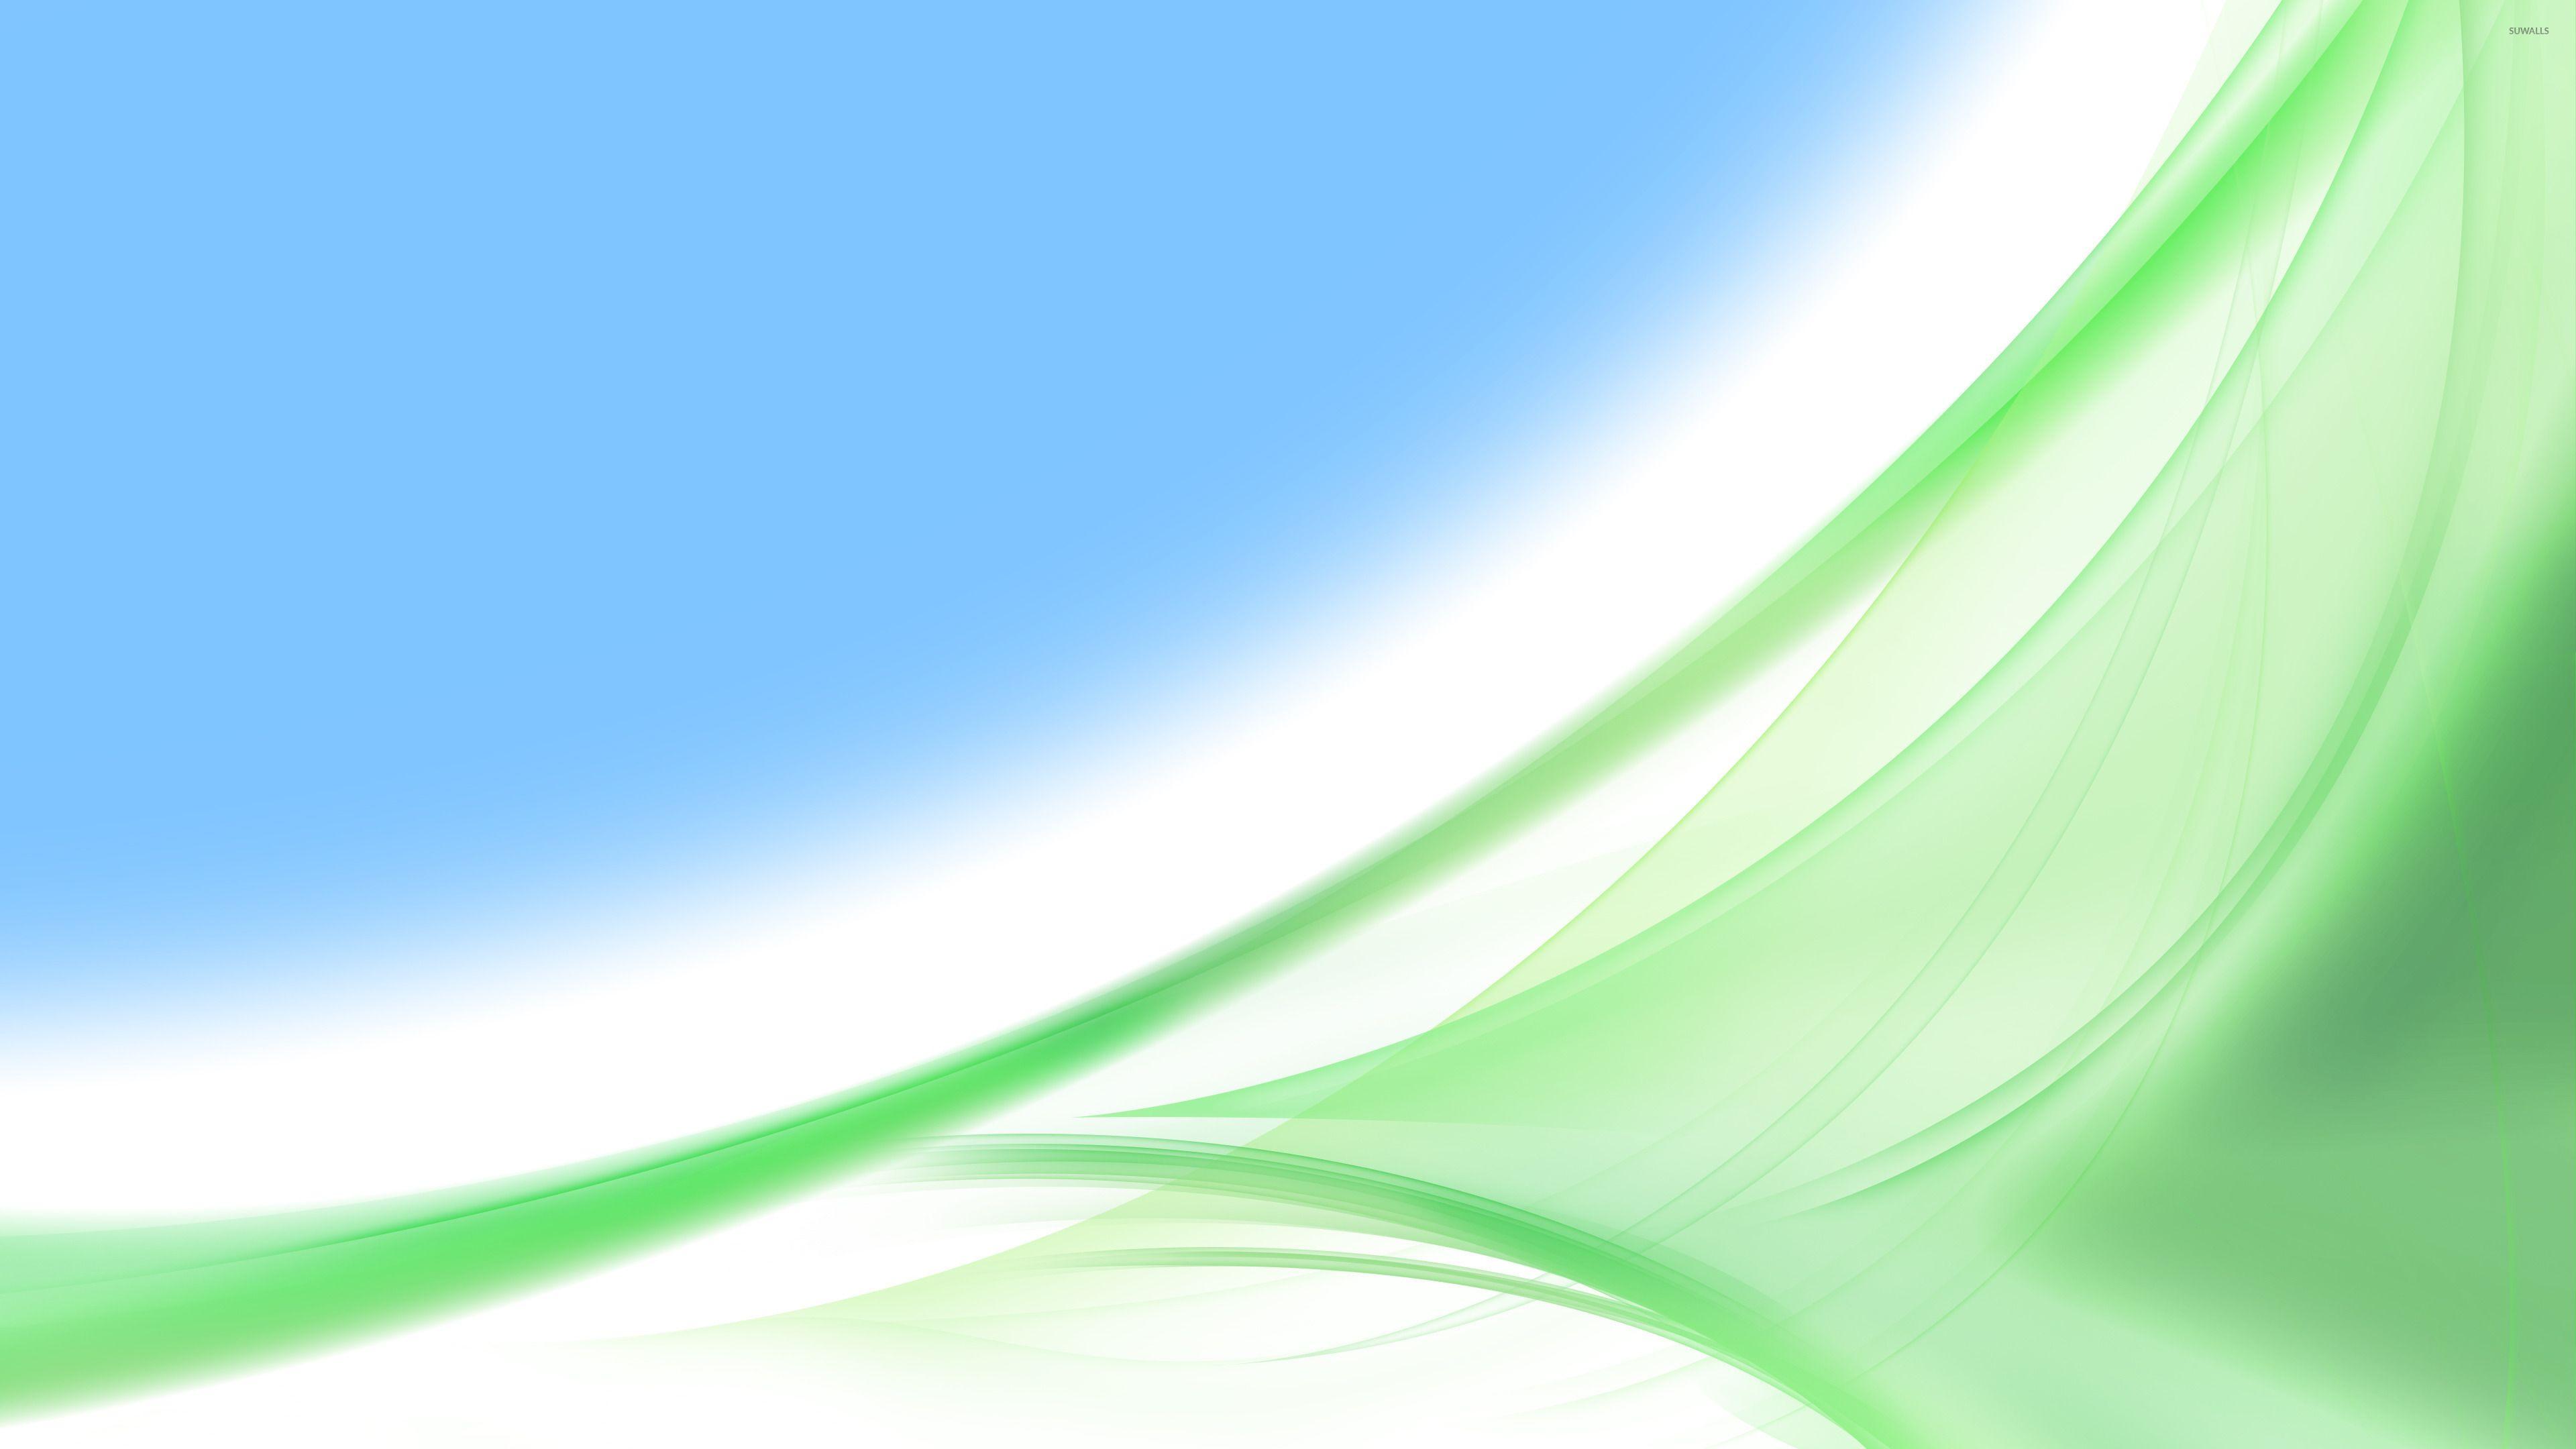 Blue and Green Abstract Wallpaper Free Blue and Green Abstract Background